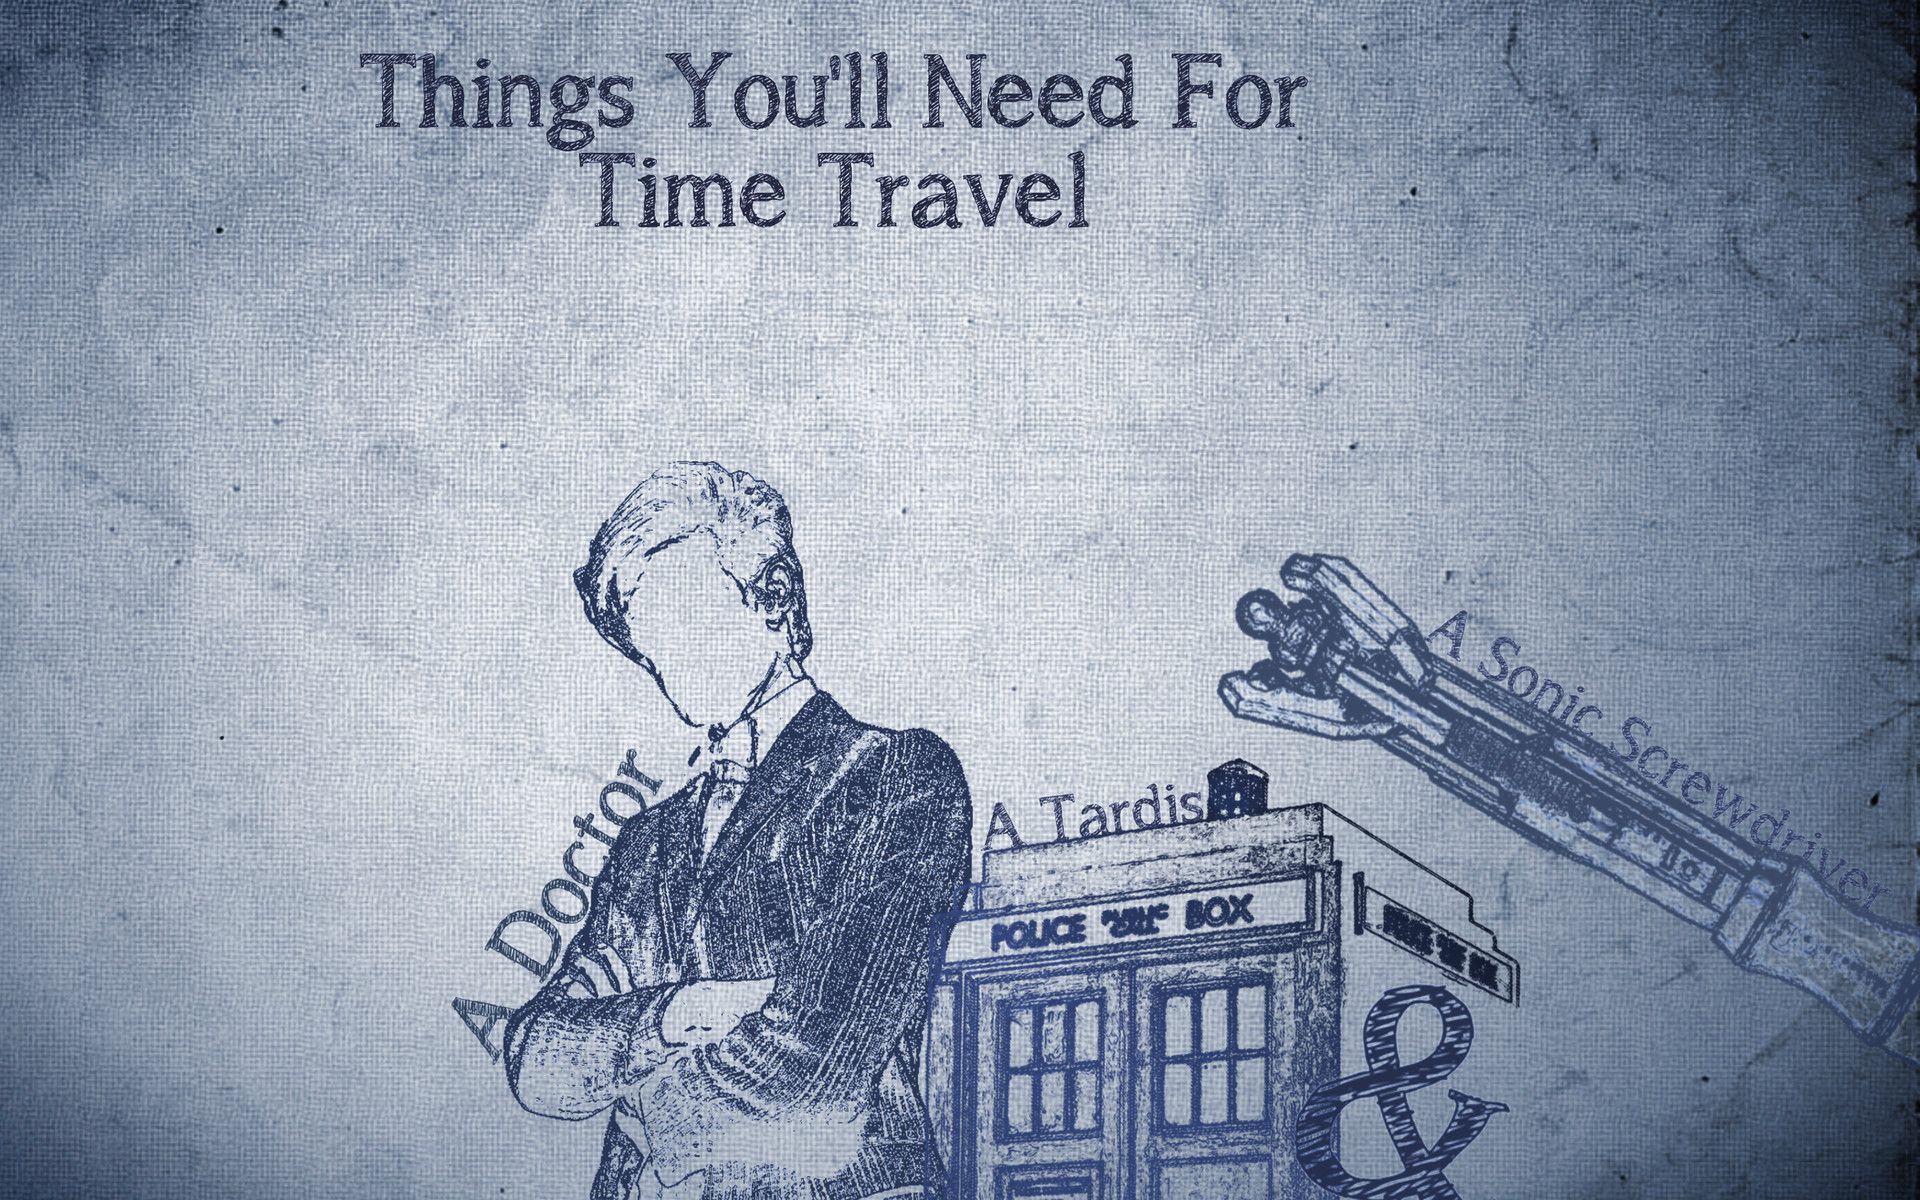 Doctor Who, The Doctor, TARDIS, Time Travel, Eleventh Doctor Wallpaper